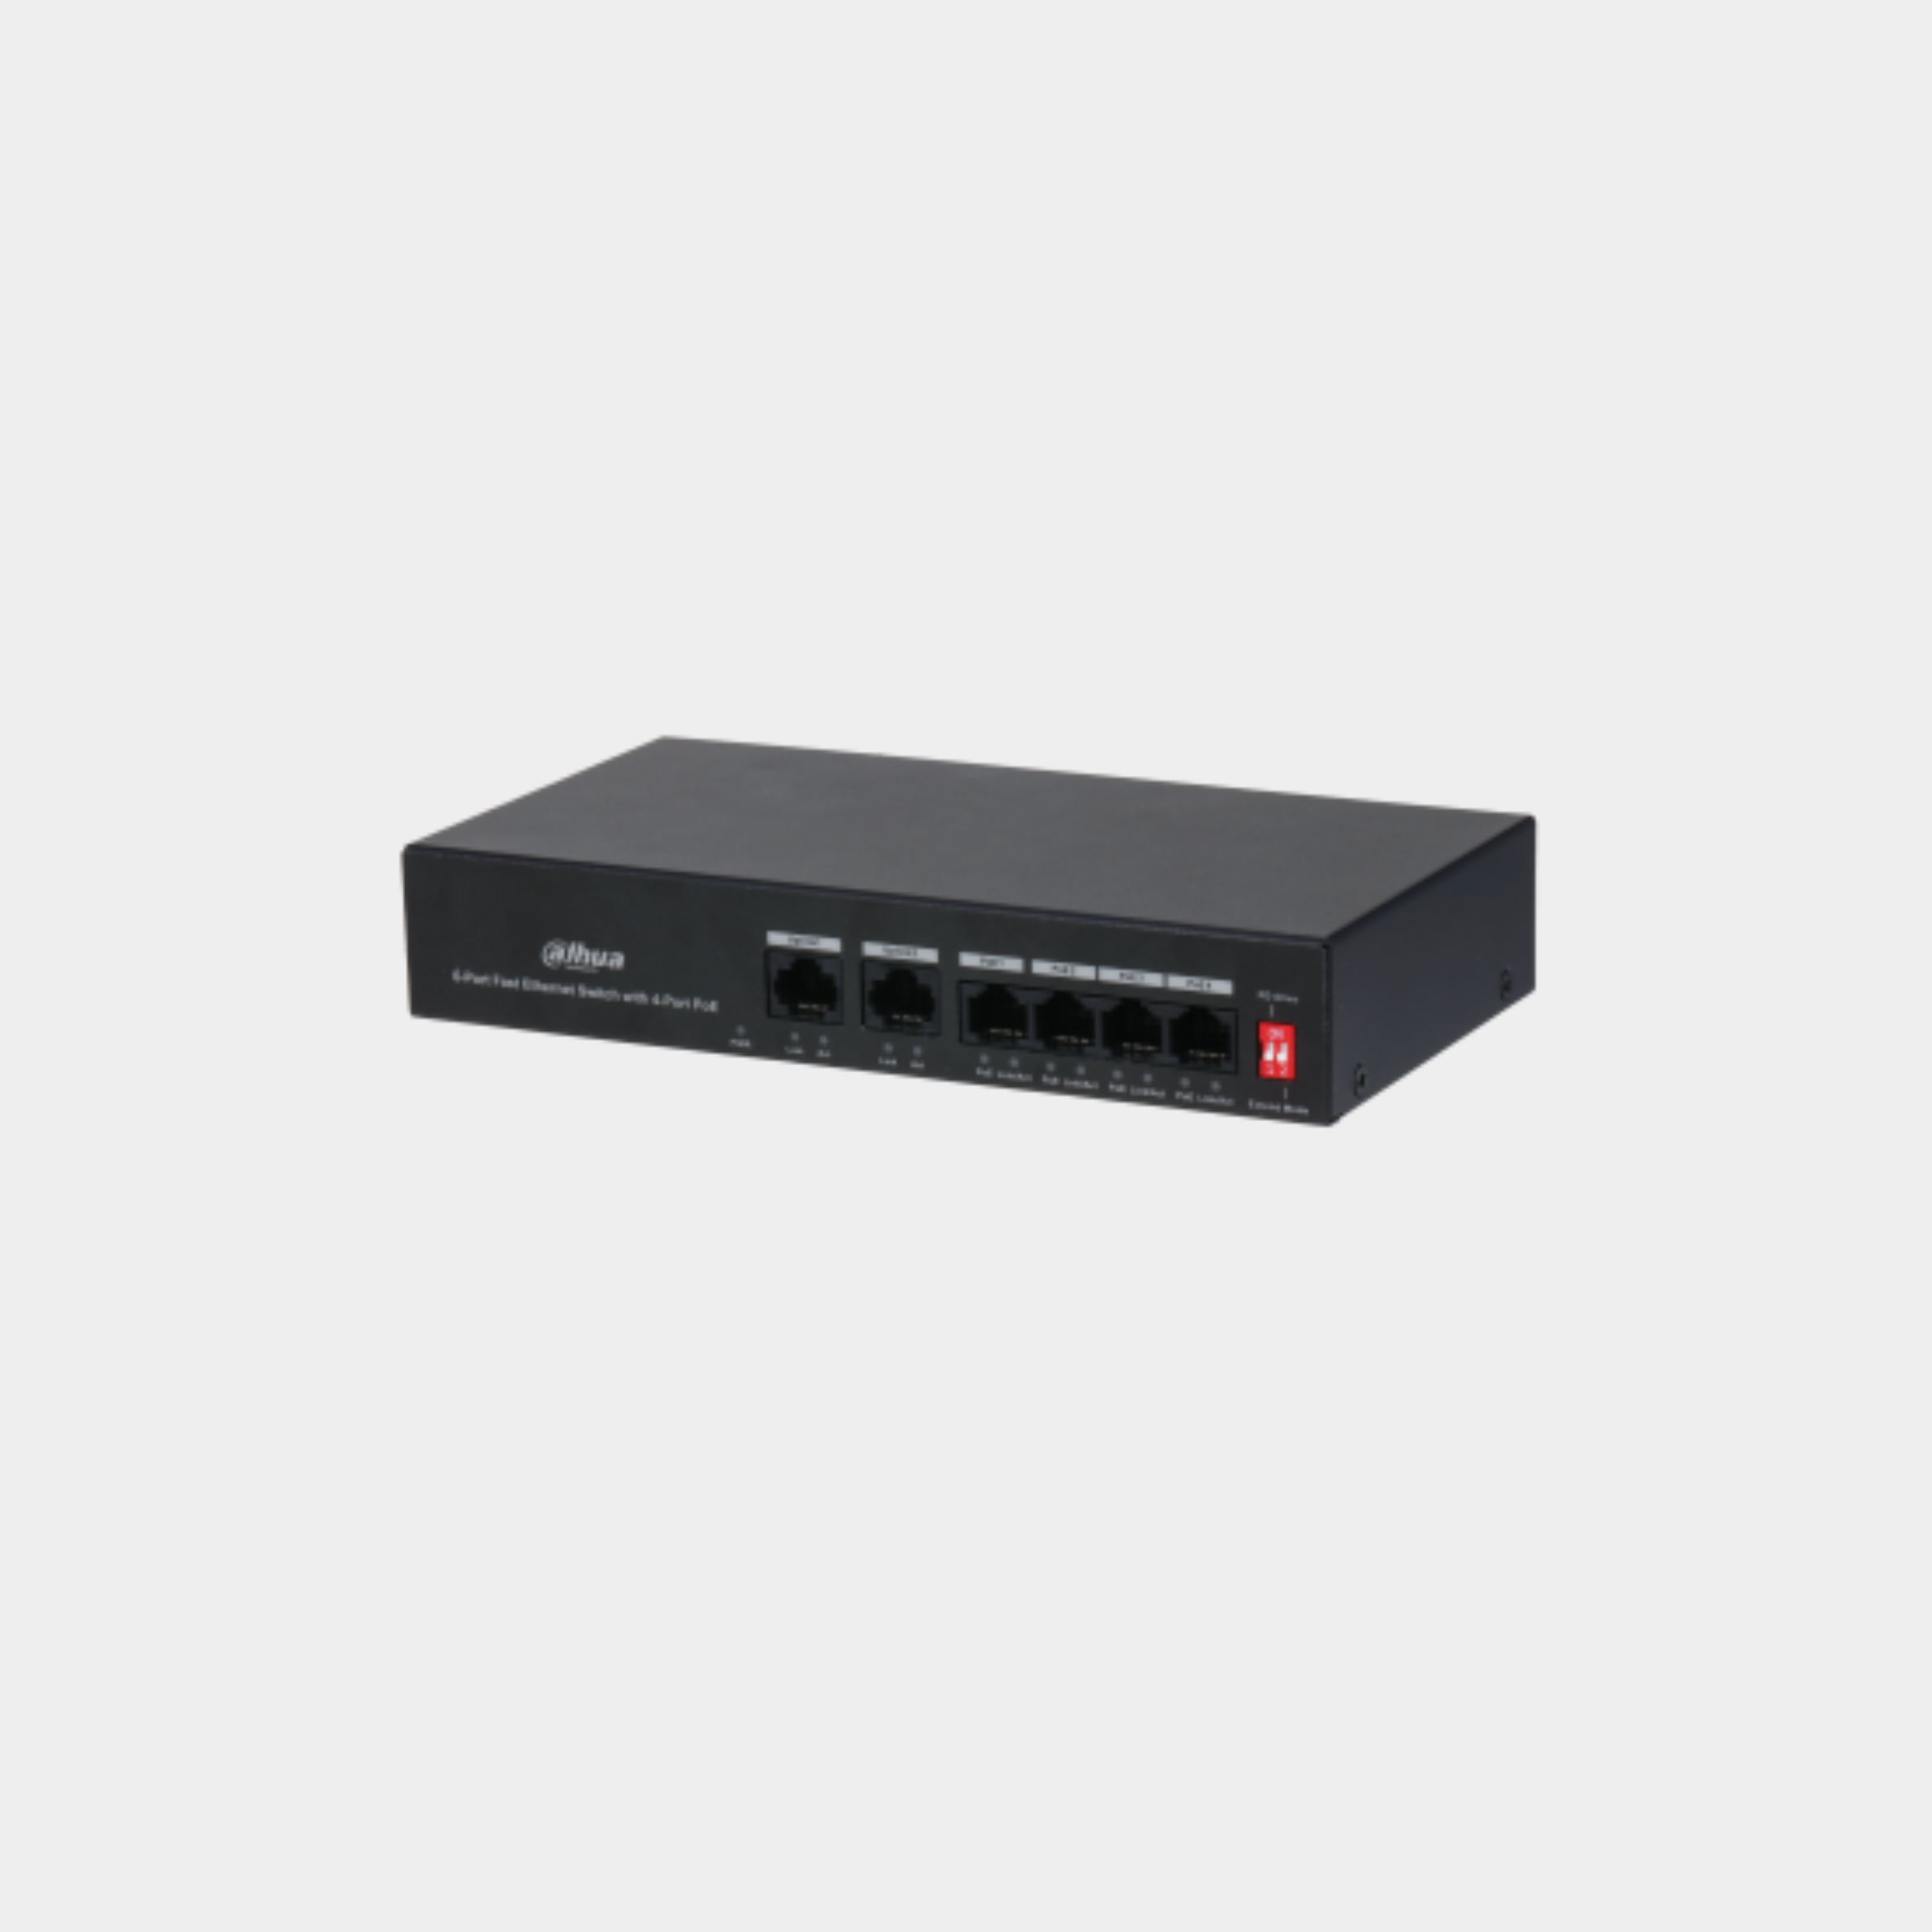 Dahua 6-Port 10/100Mbps Unmanaged Desktop Switch with 4 PoE Ports